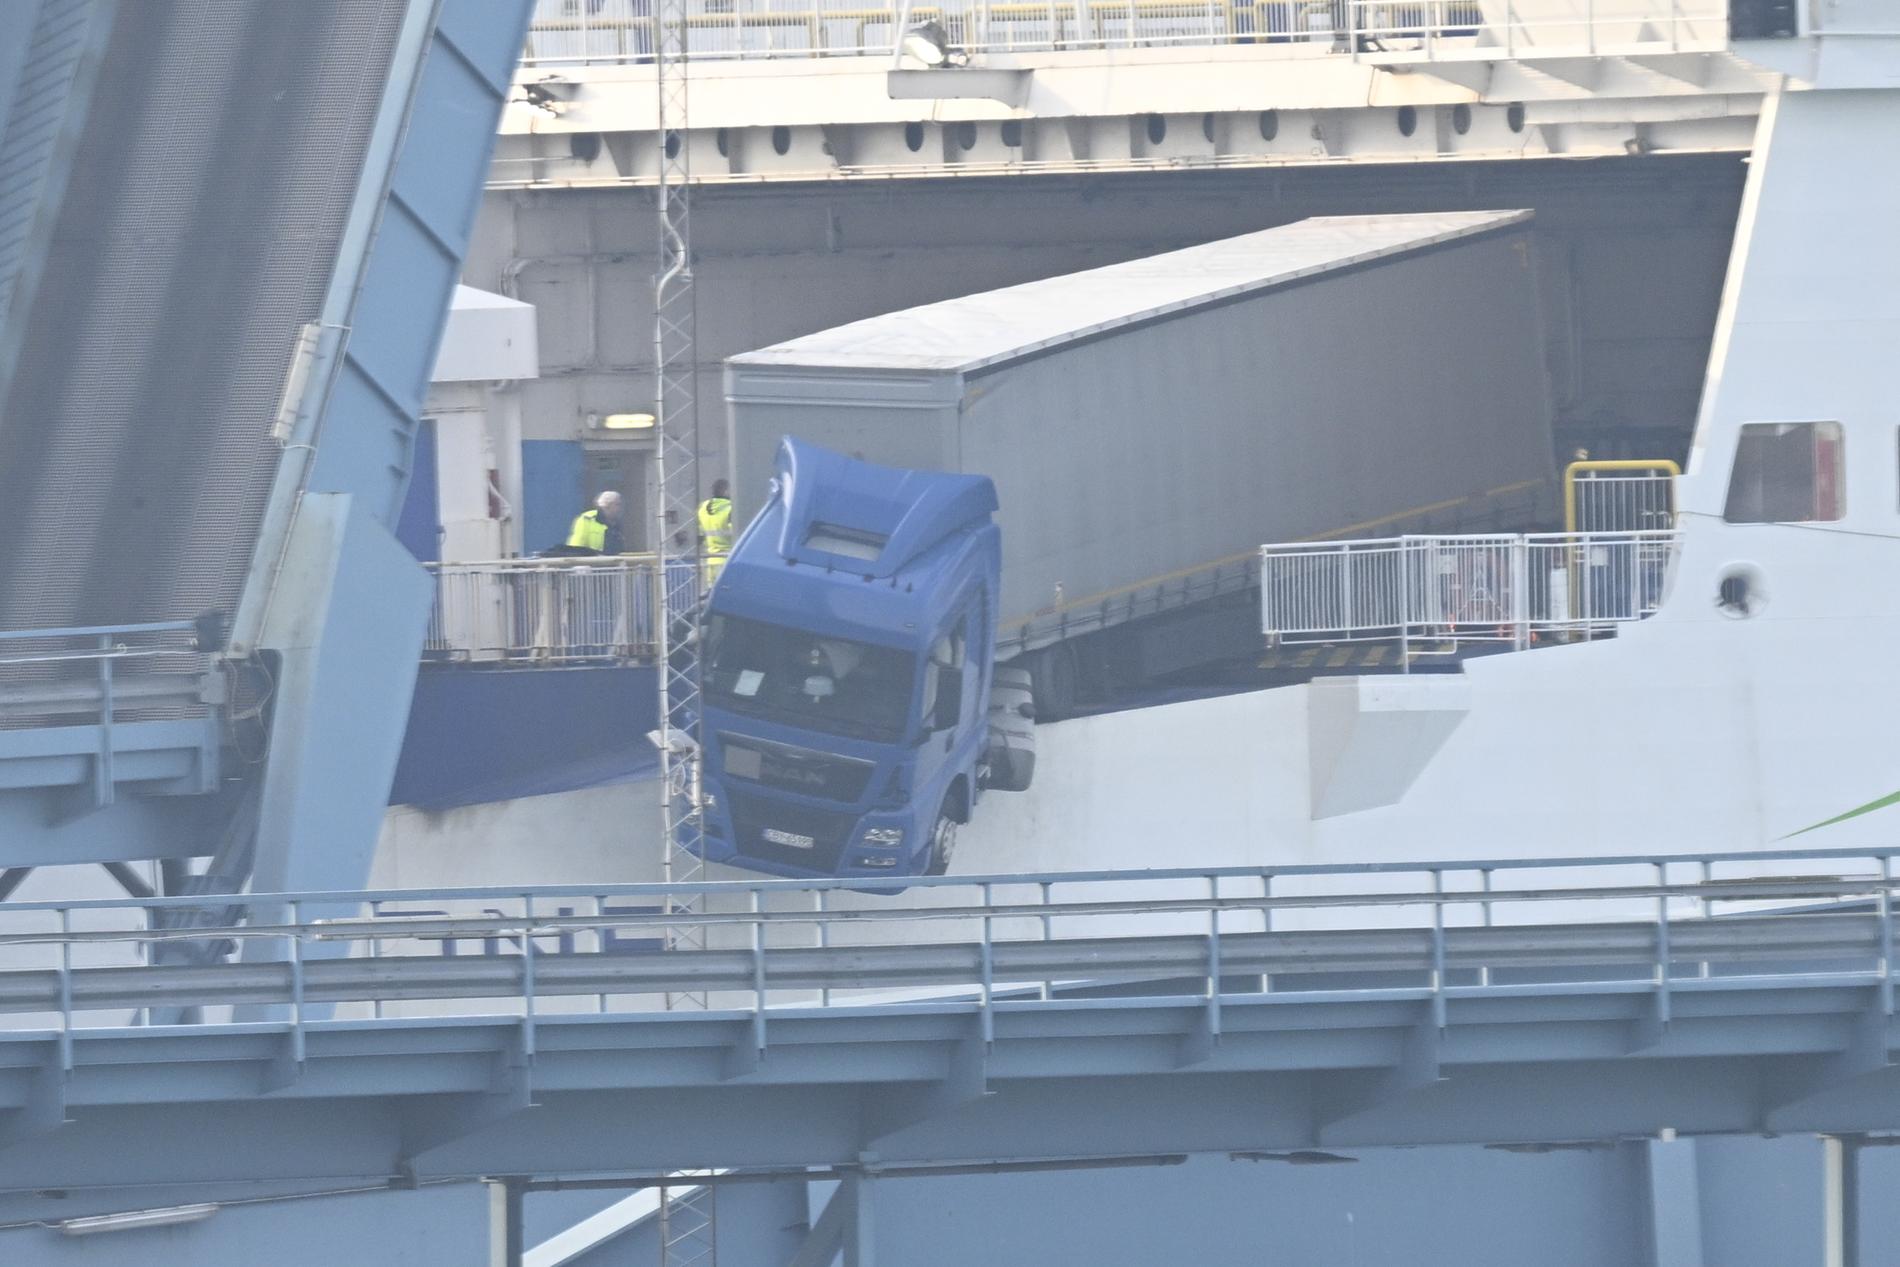 A truck hangs on the edge of a ferry in Sweden